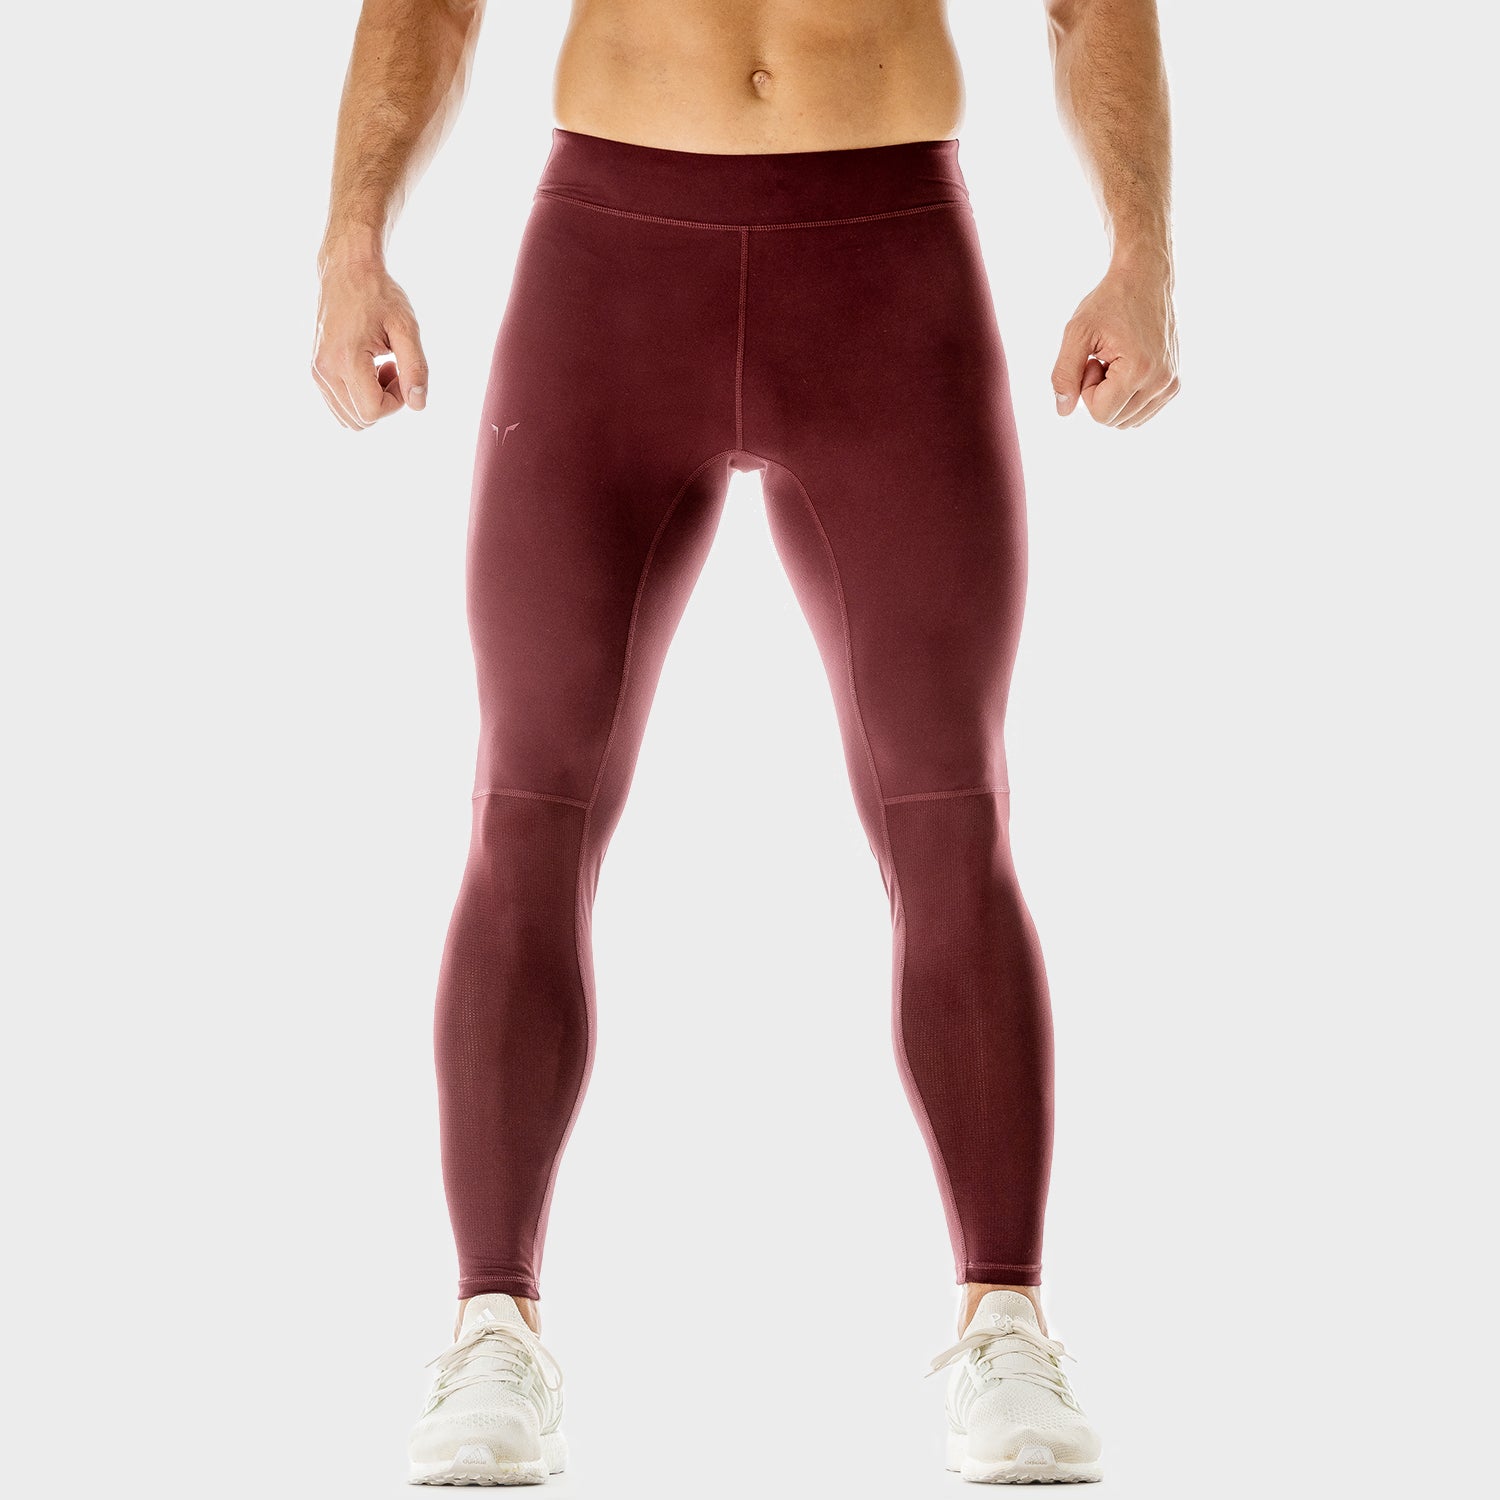 squatwolf-gym-leggings-for-men-360-performance-tights-tawny-port-workout-clothes